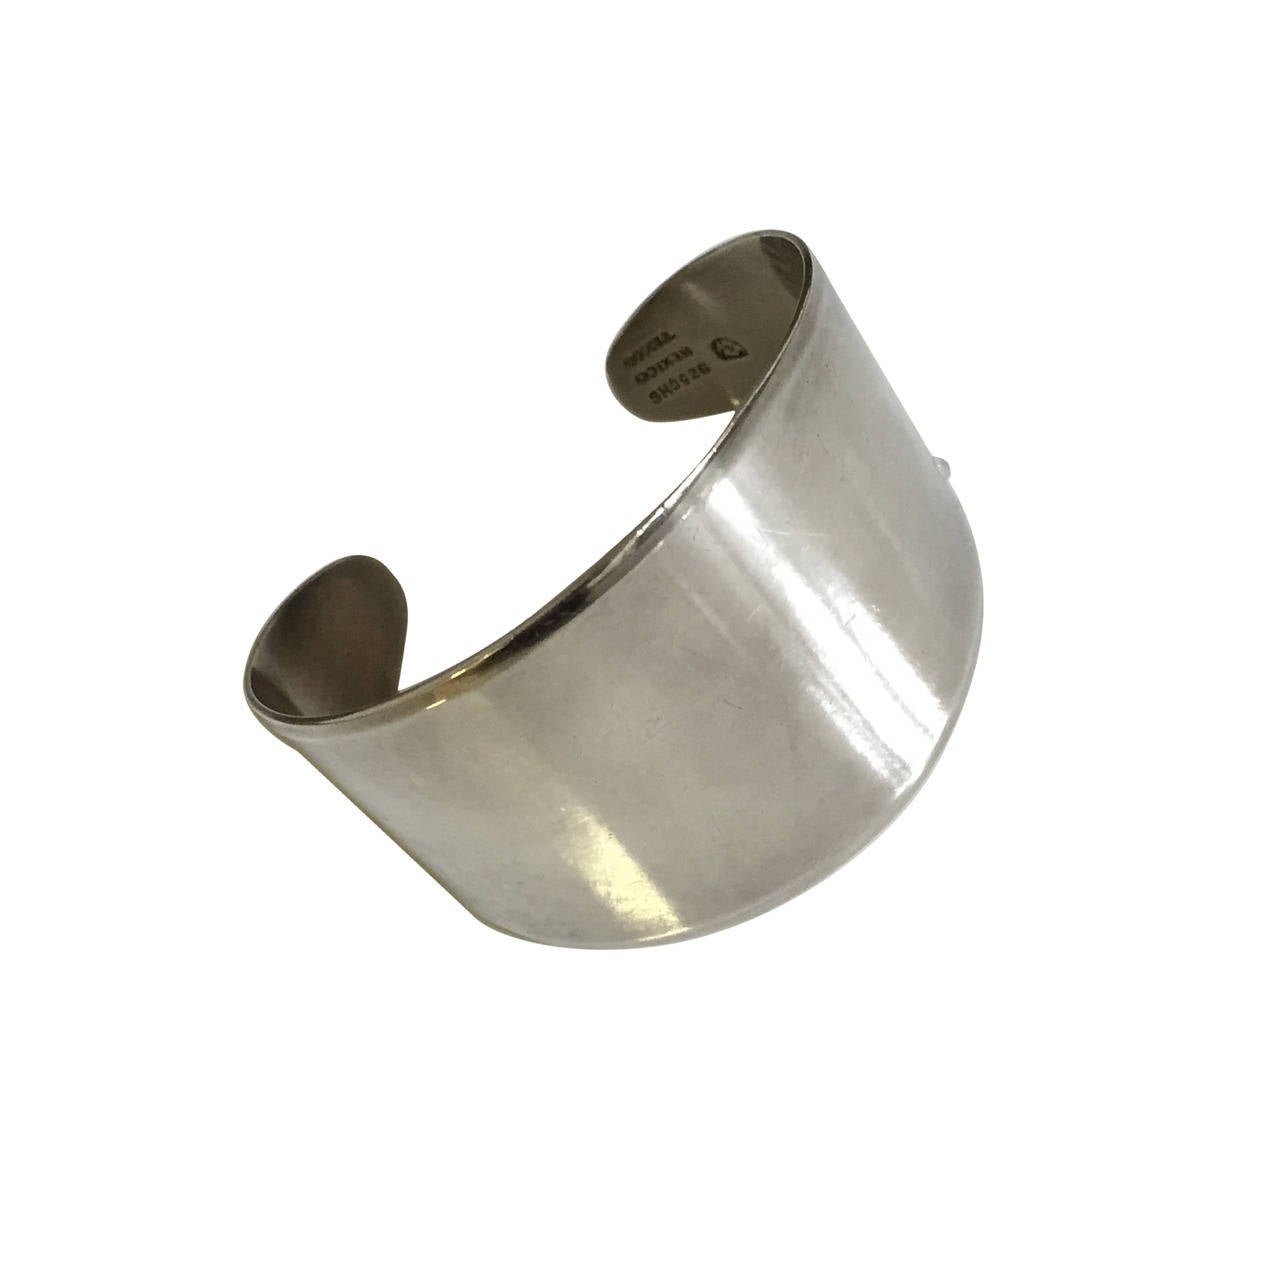 Taxco Mexico silver modernist cuff bracelet. For Sale